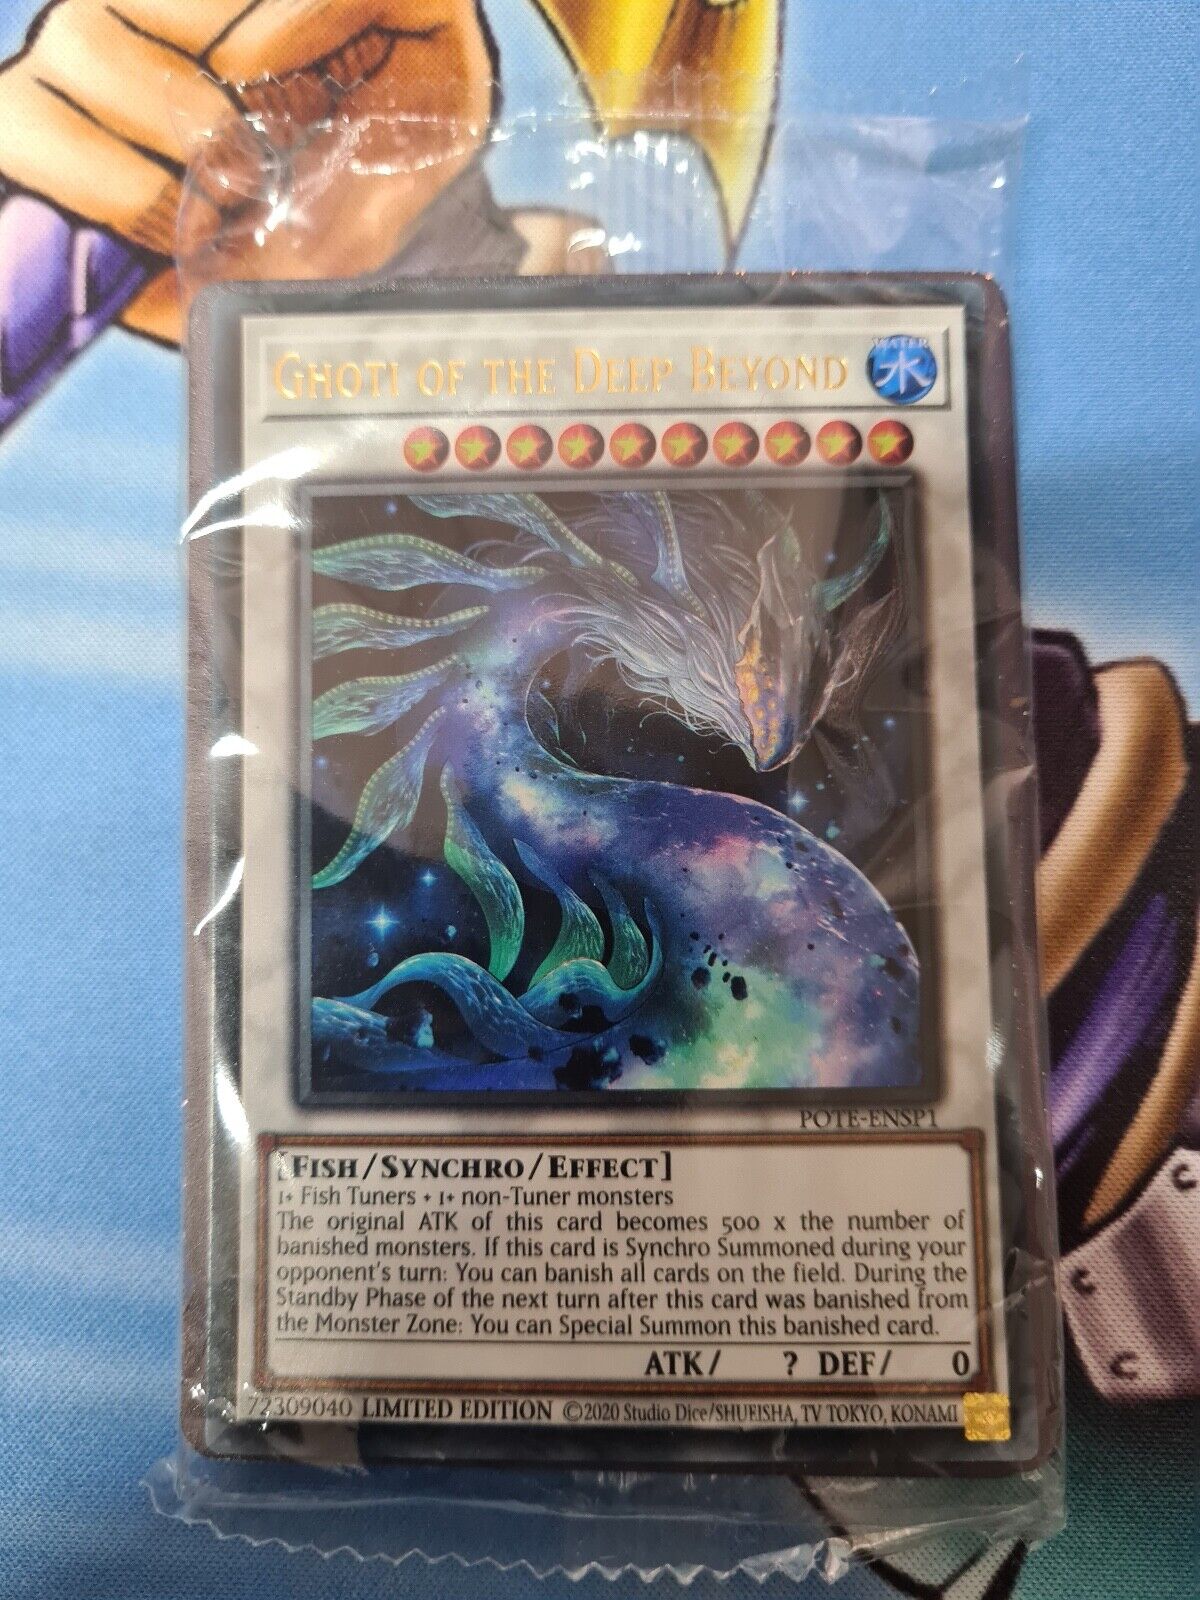 GHOTI OF THE DEEP BEYOND POTE-ENSP1 SEALED PACK WITH FIELD CENTERS YUGIOH